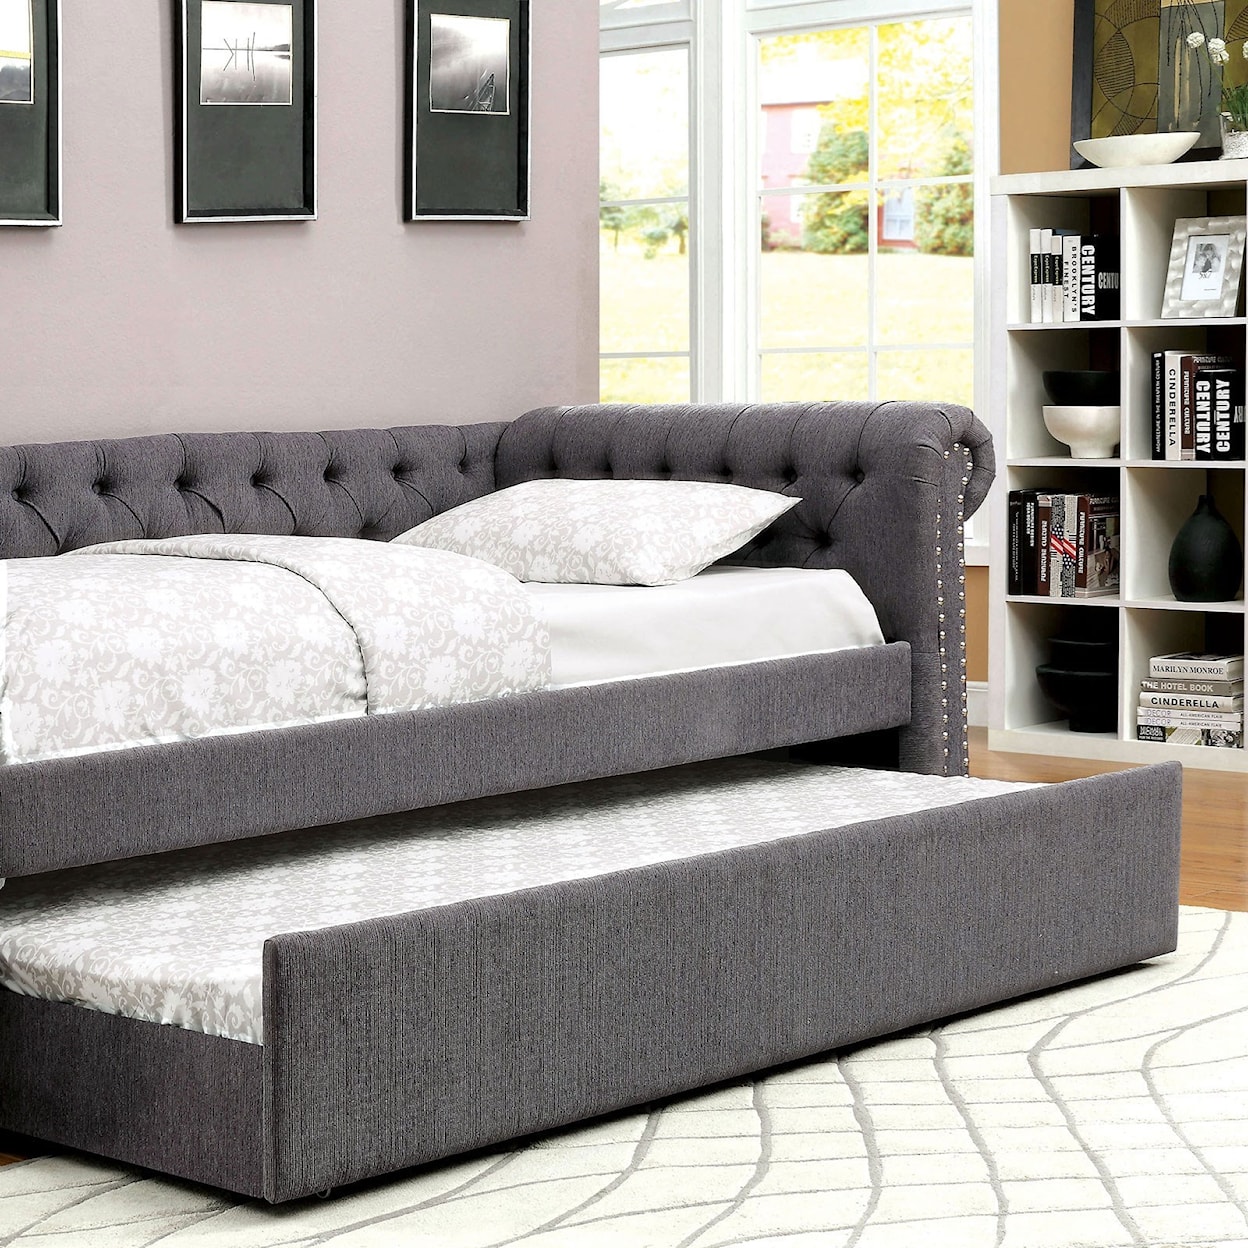 FUSA Leanna Daybed w/ Trundle